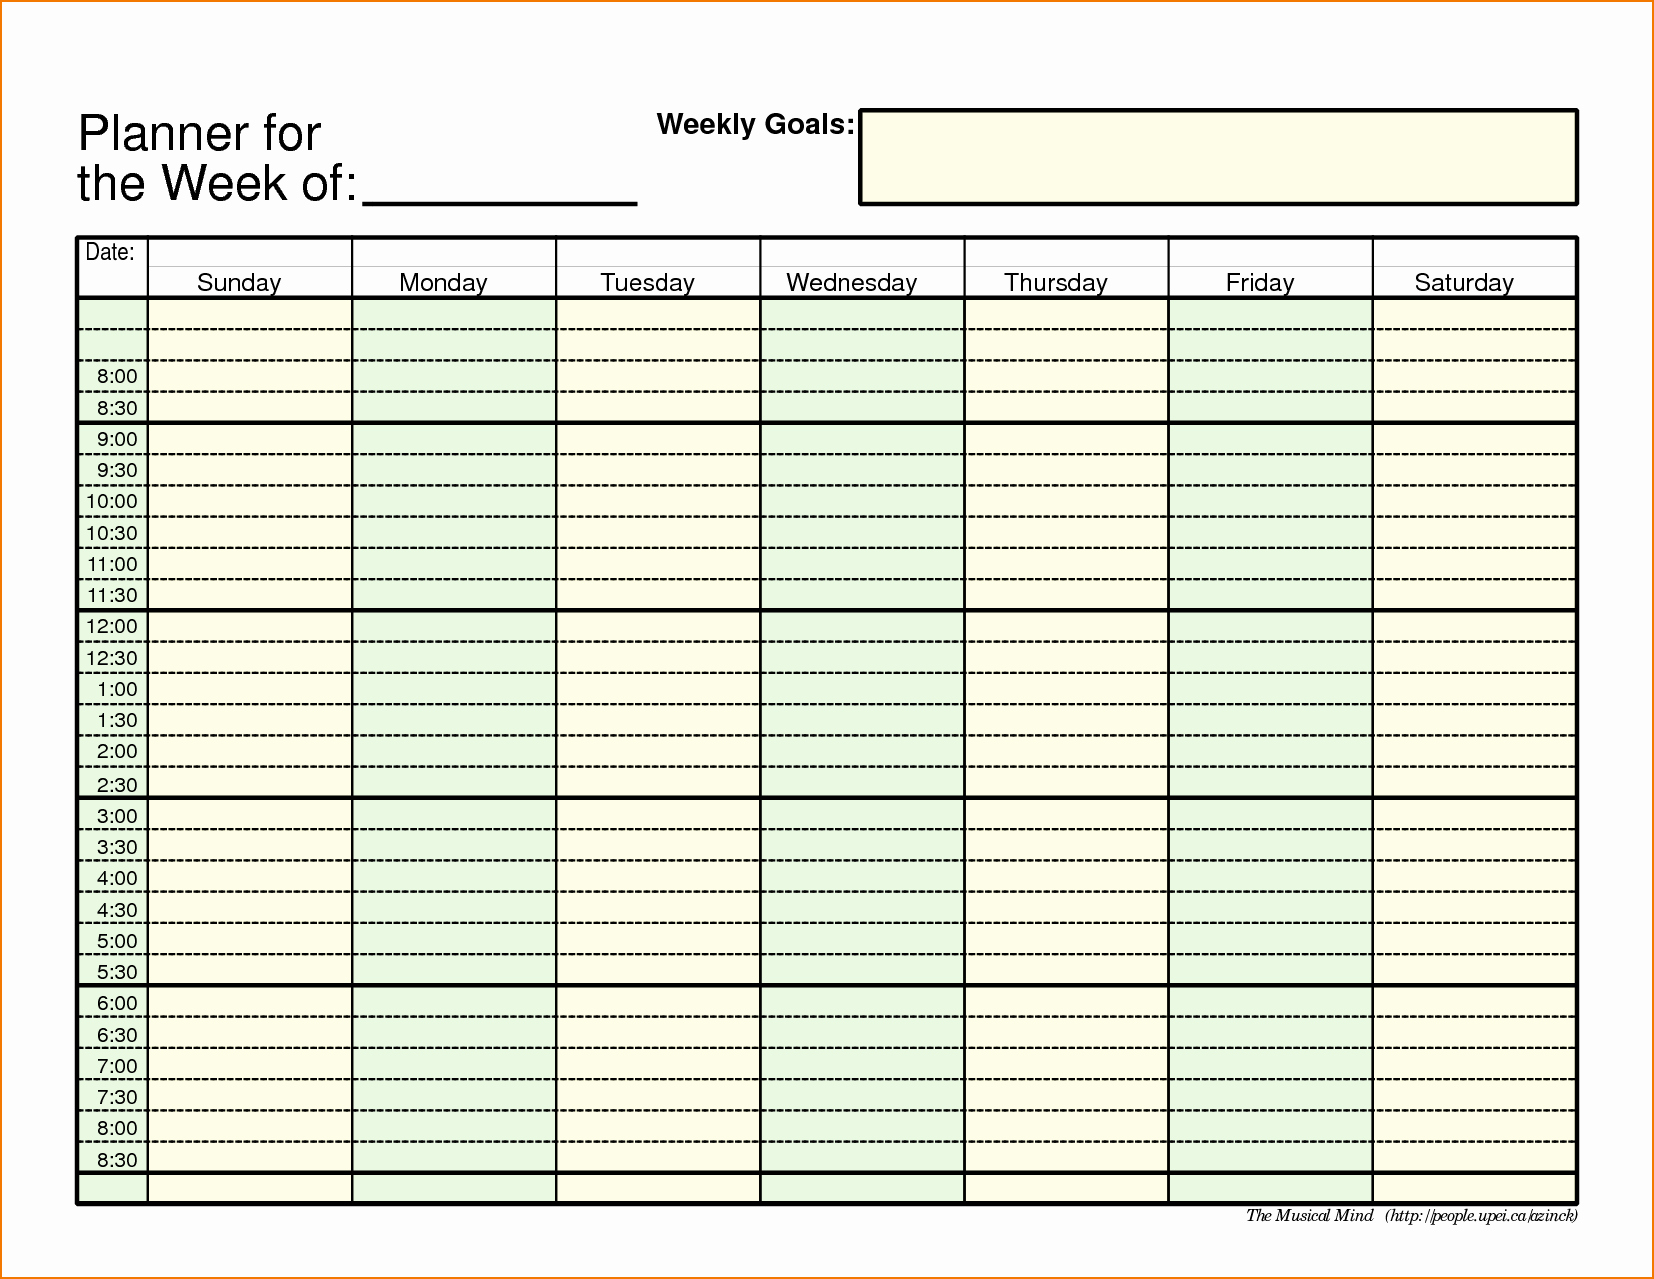 Daily Planner Excel Template Lovely 5 Weekly Planner Template Excel